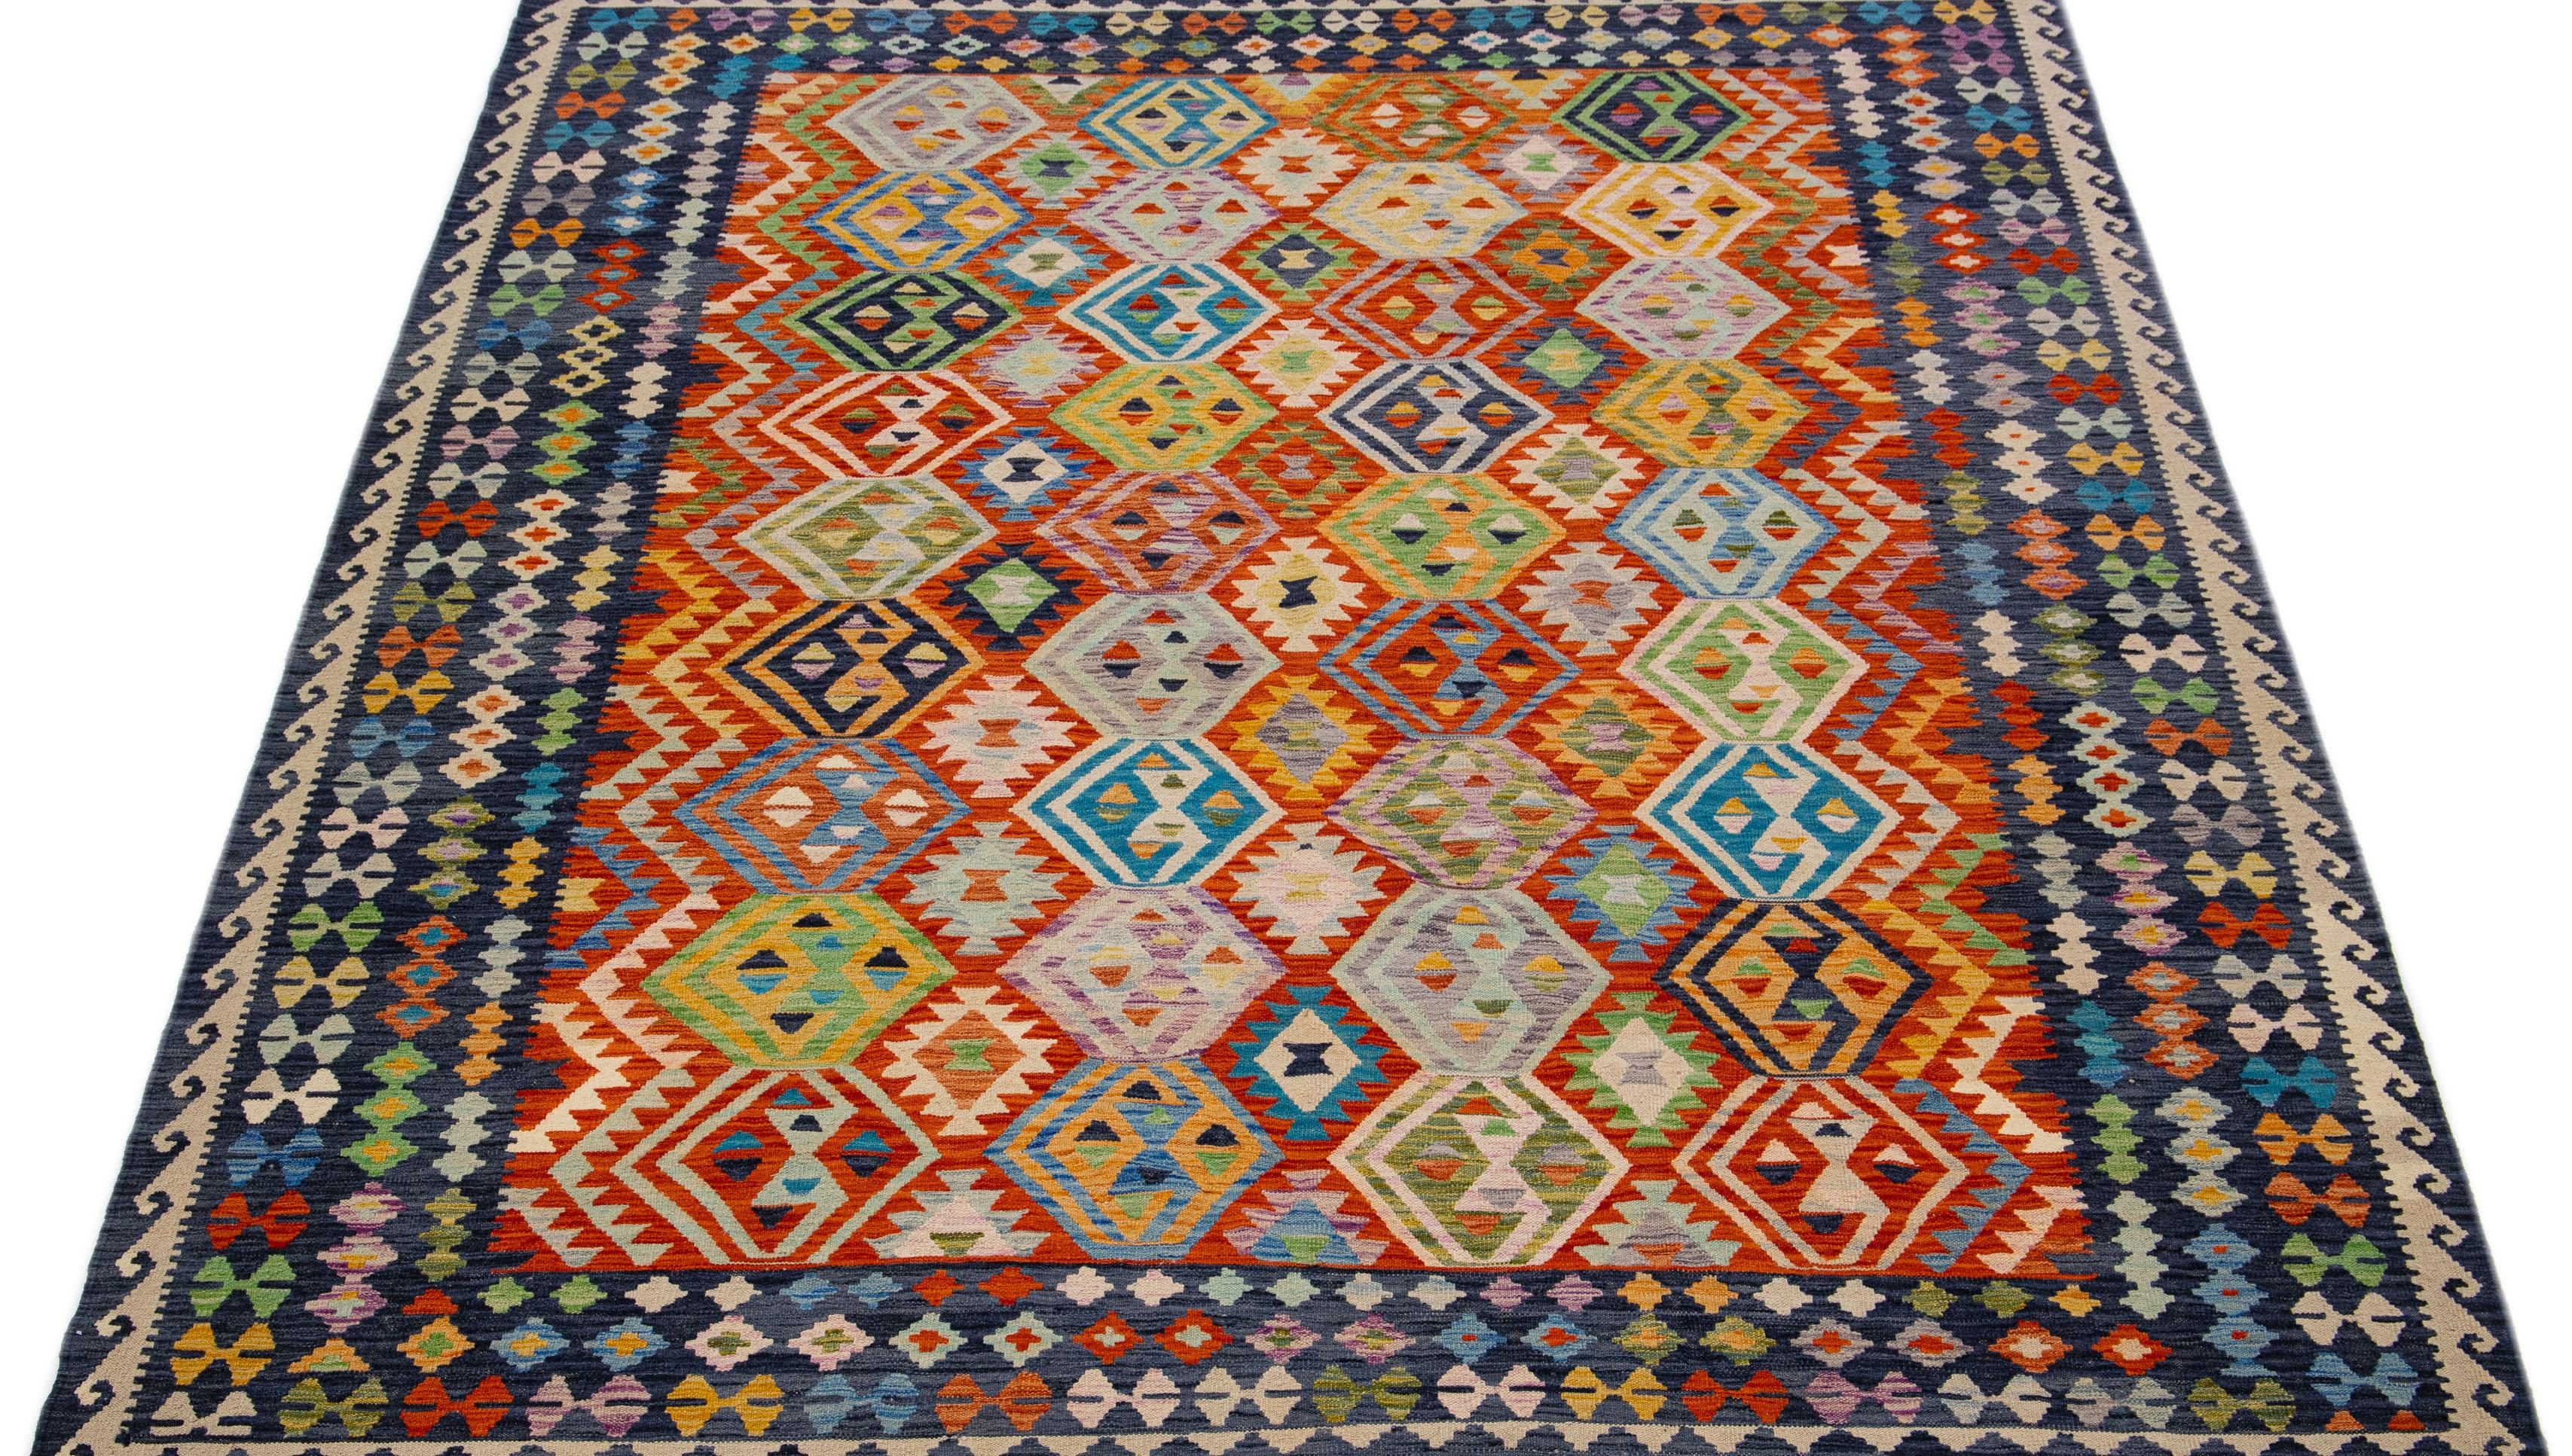 A contemporary kilim rug showcases an exuberant and detailed geometric motif throughout, employing a variety of multicolored tones that make it an ageless incorporation in modern interior design.

This rug measures 8'5